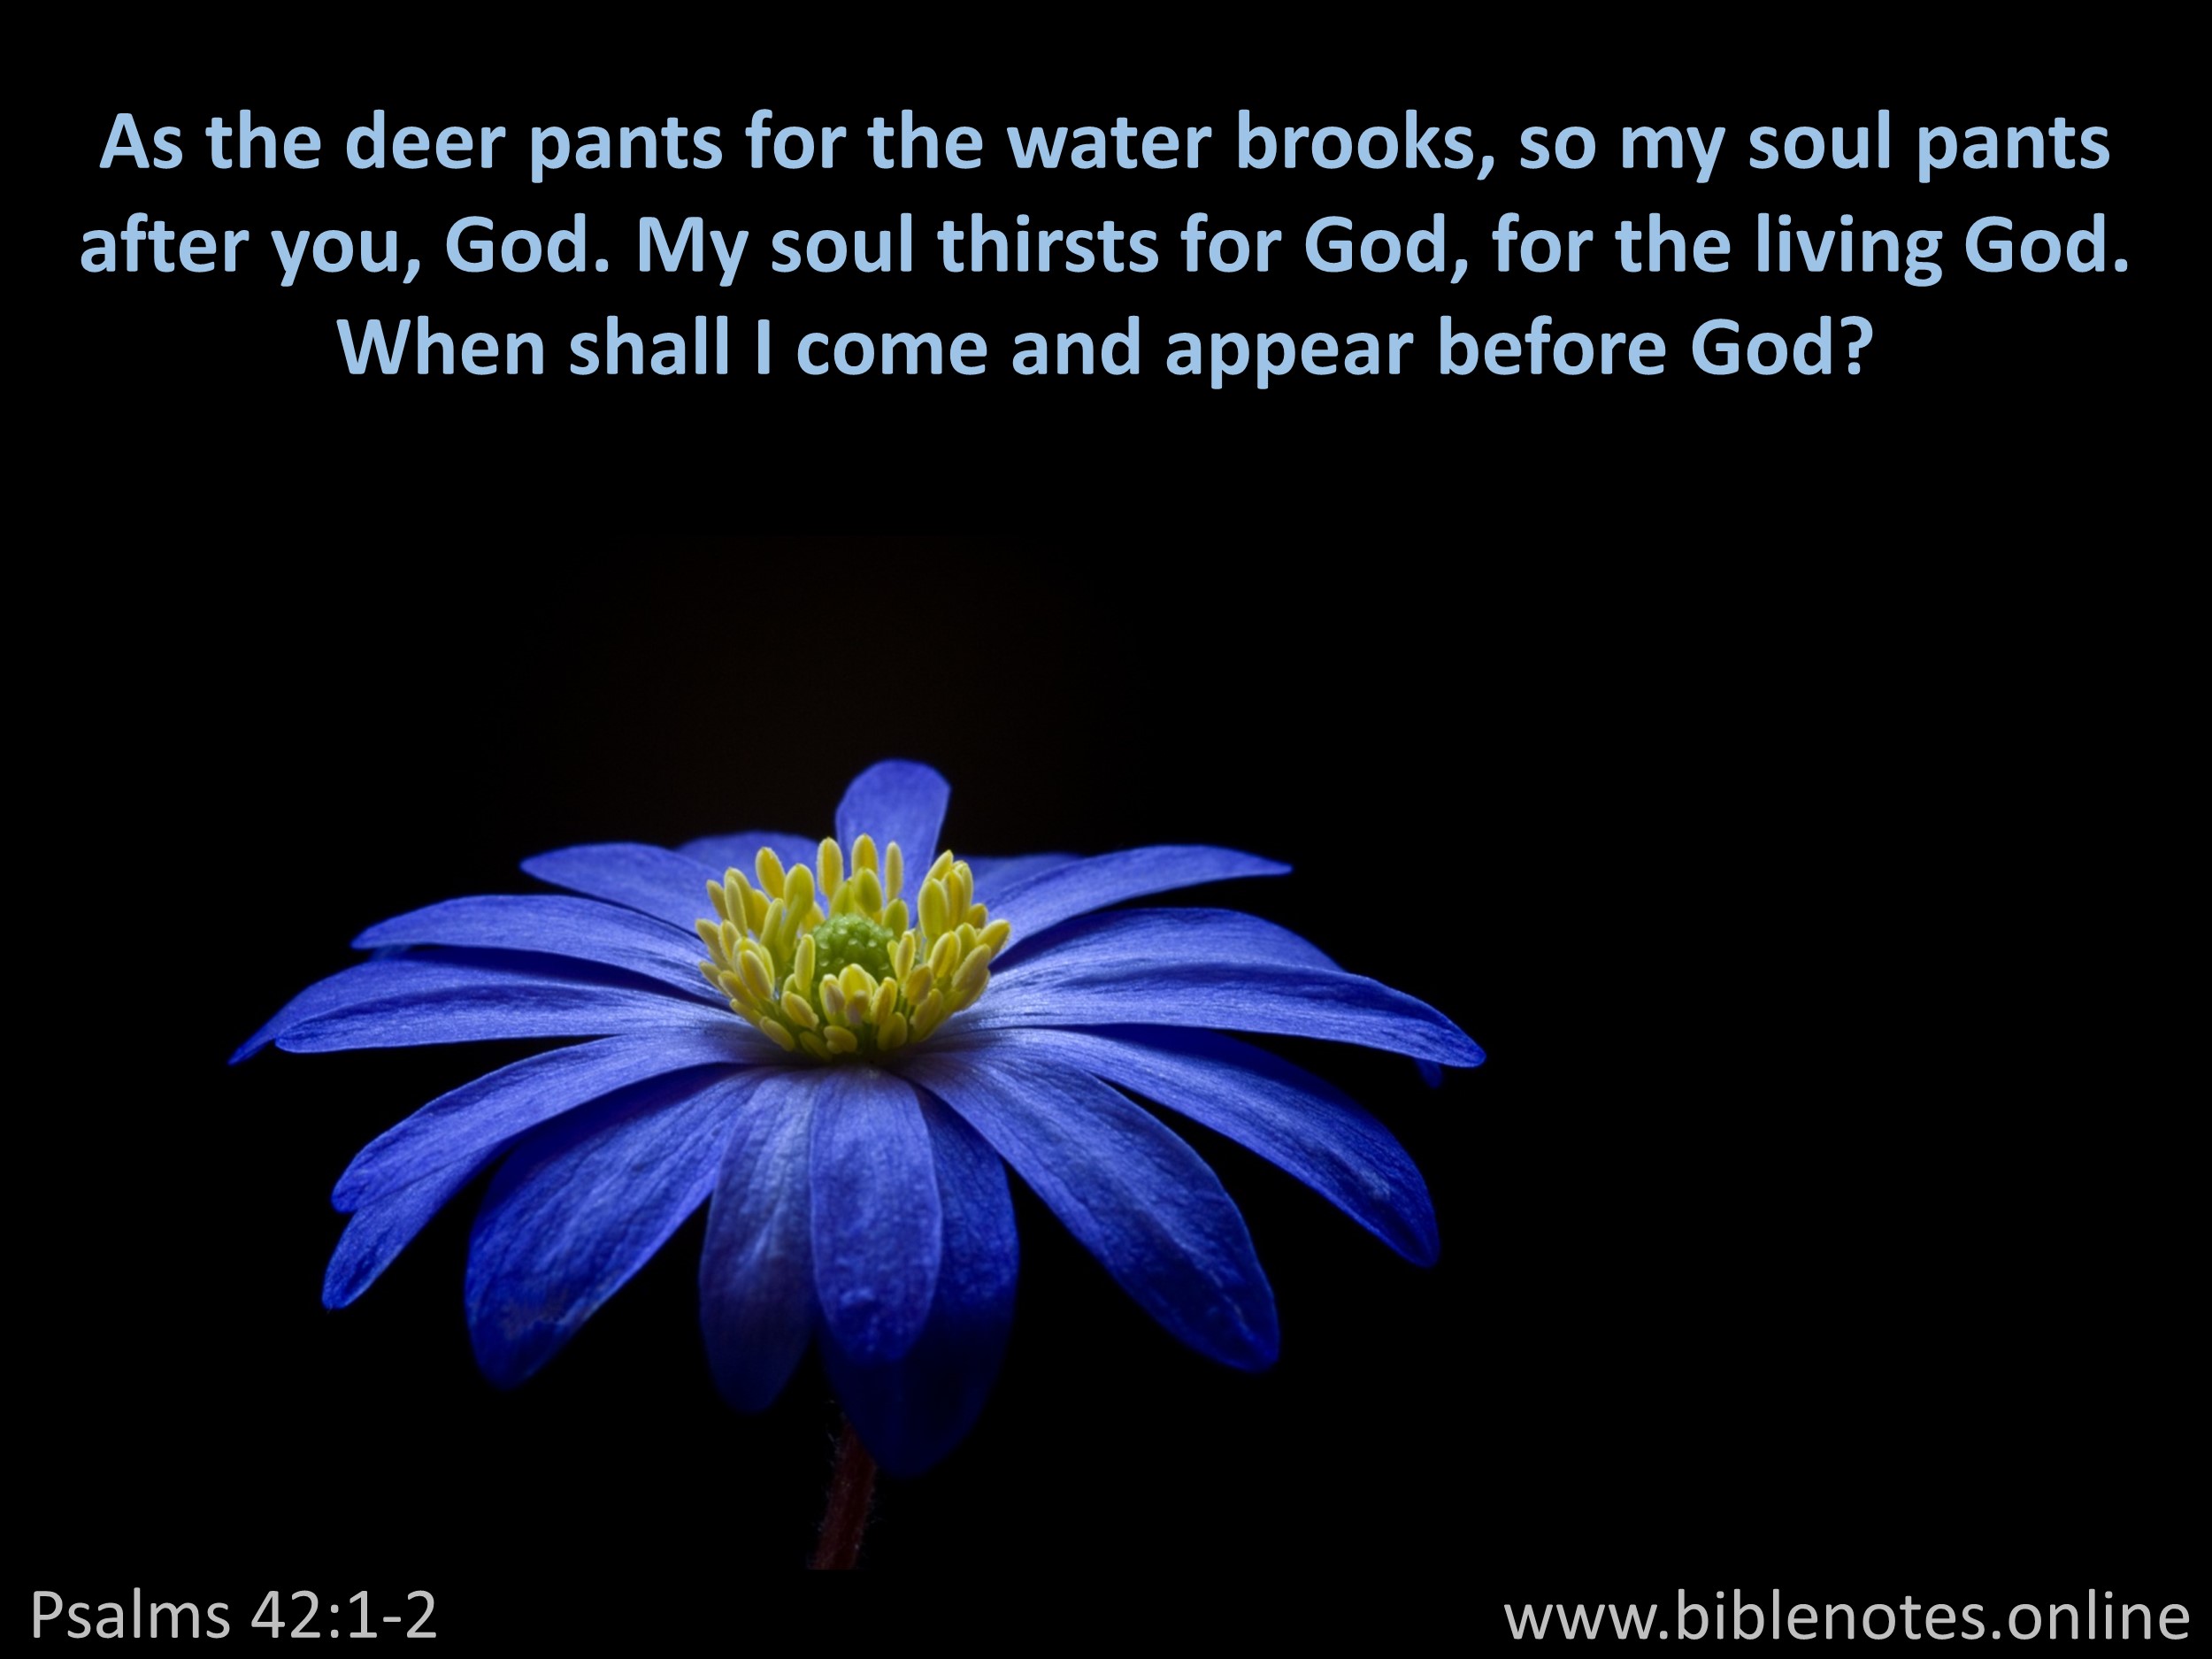 Bible Verse from Psalms Chapter 42